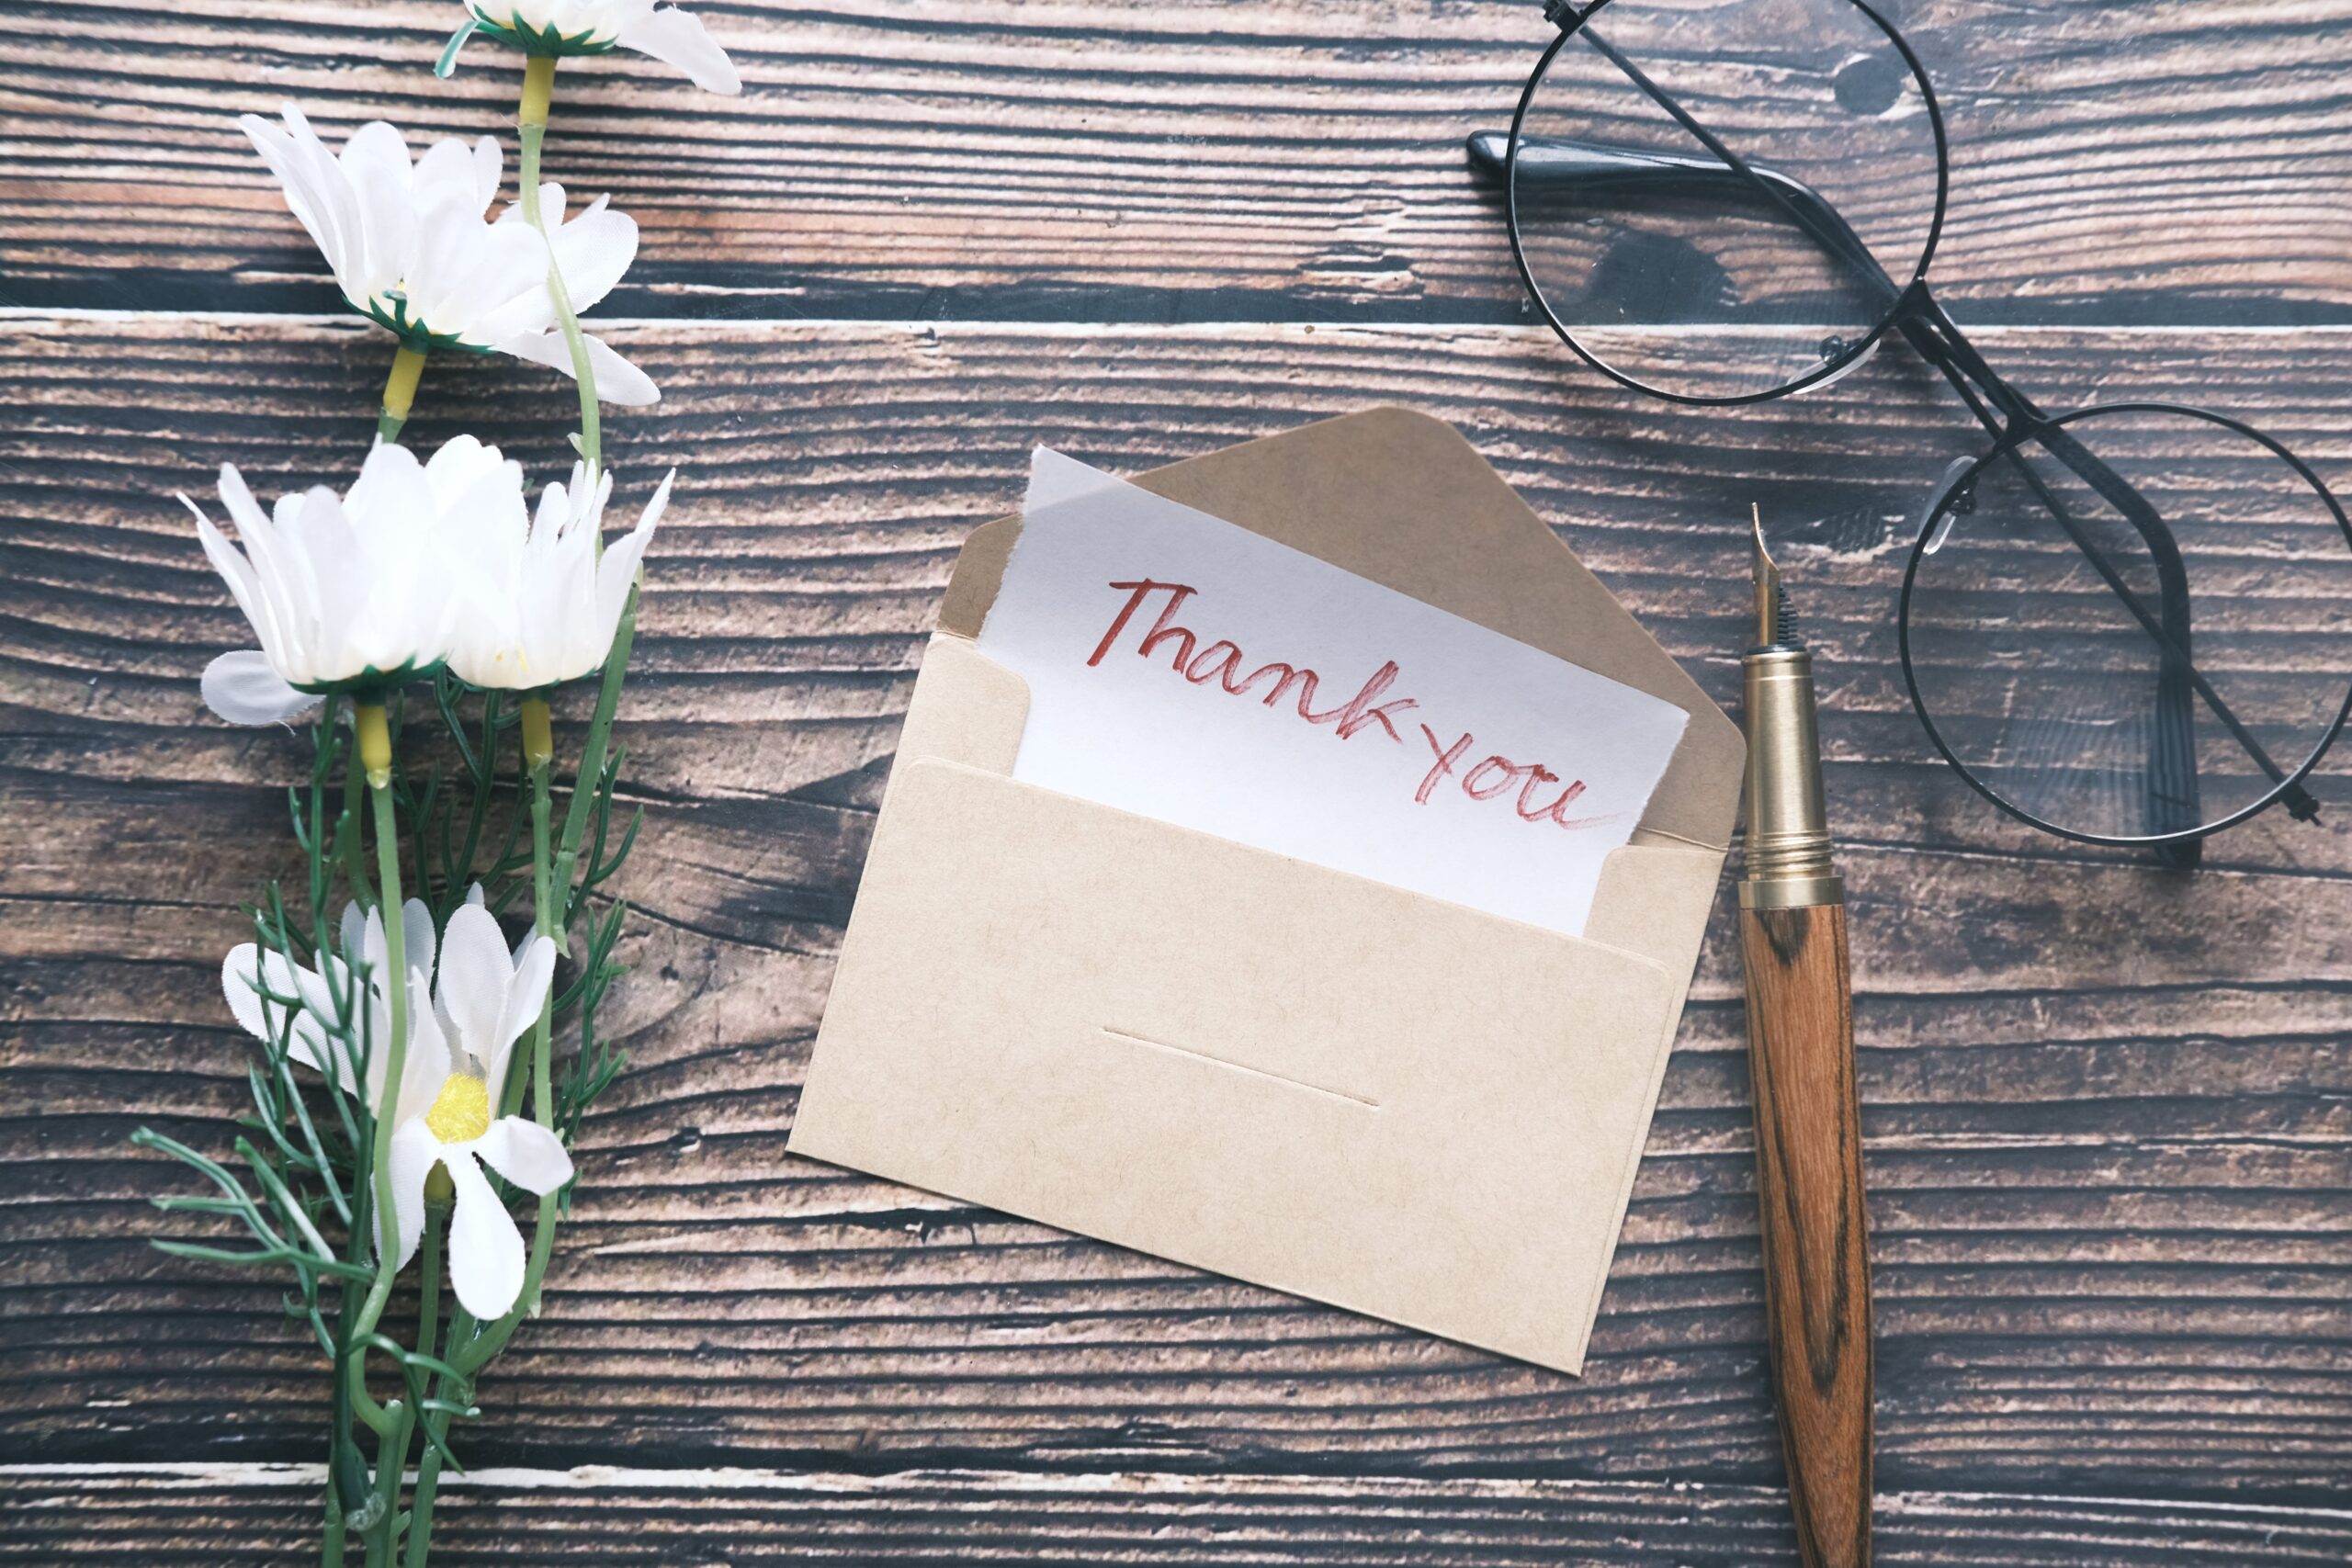 Thank You Note Written on Paper With a Flower and Glasses Positioned Nearby